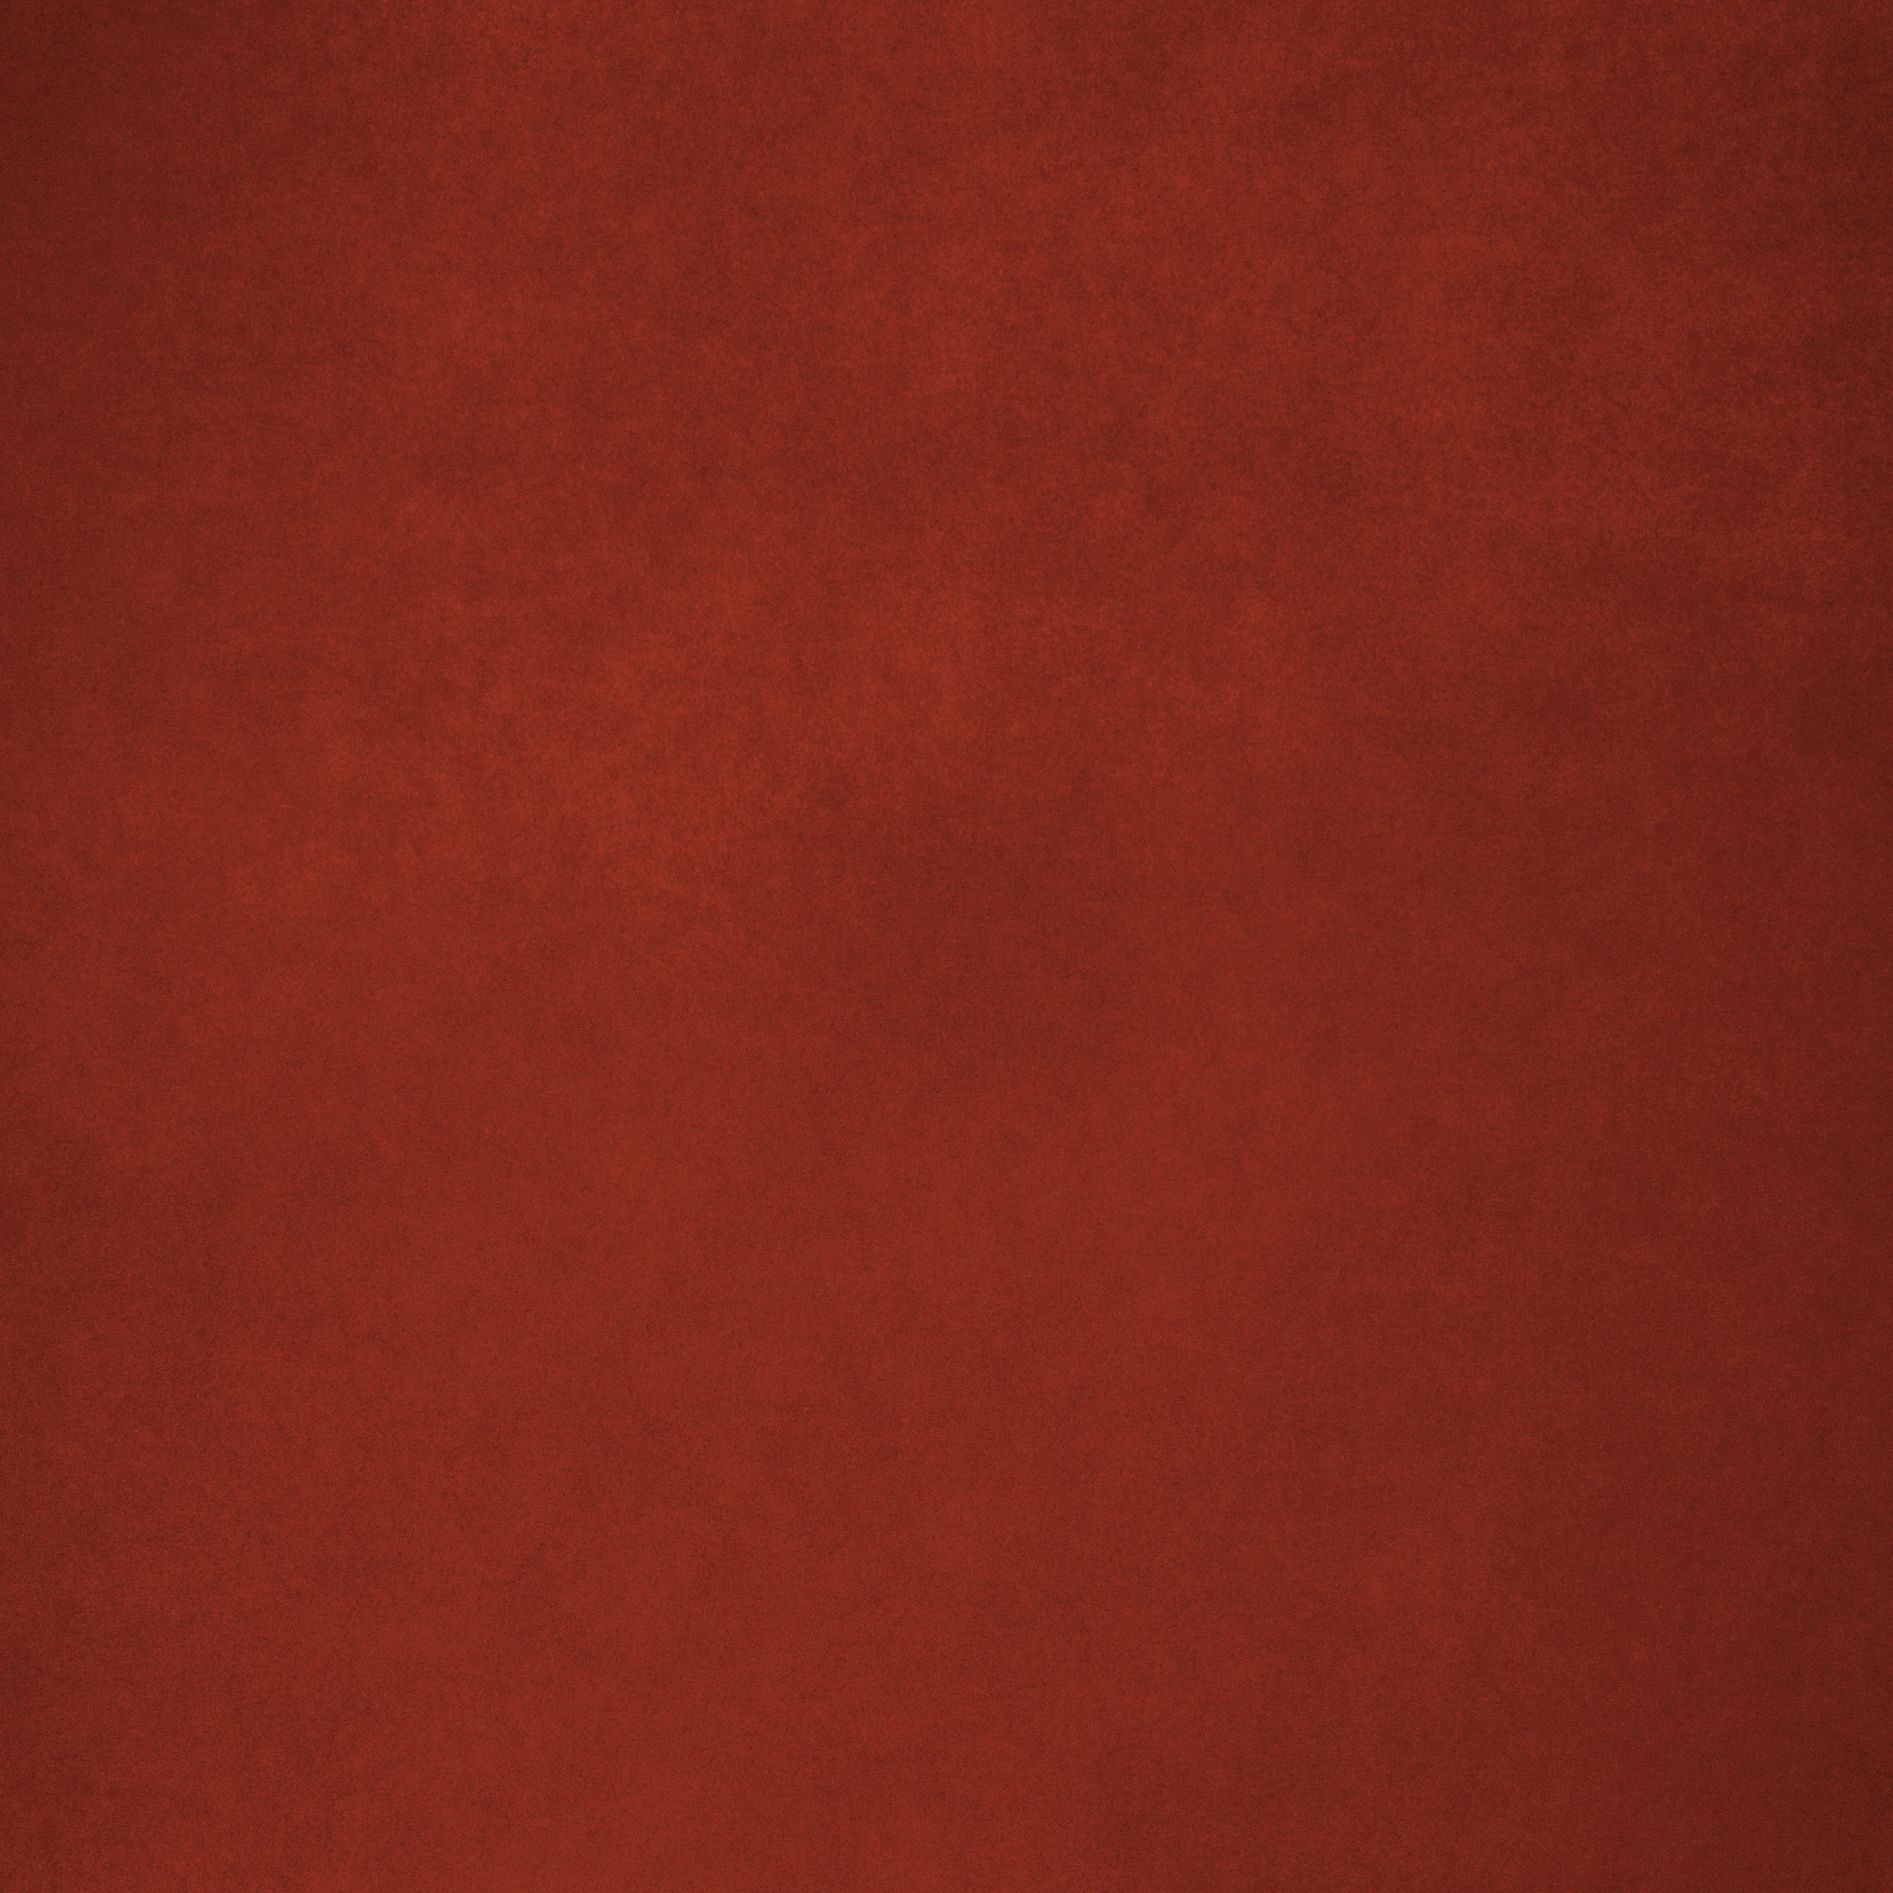 High Quality Blank Red Background Blank Meme Template